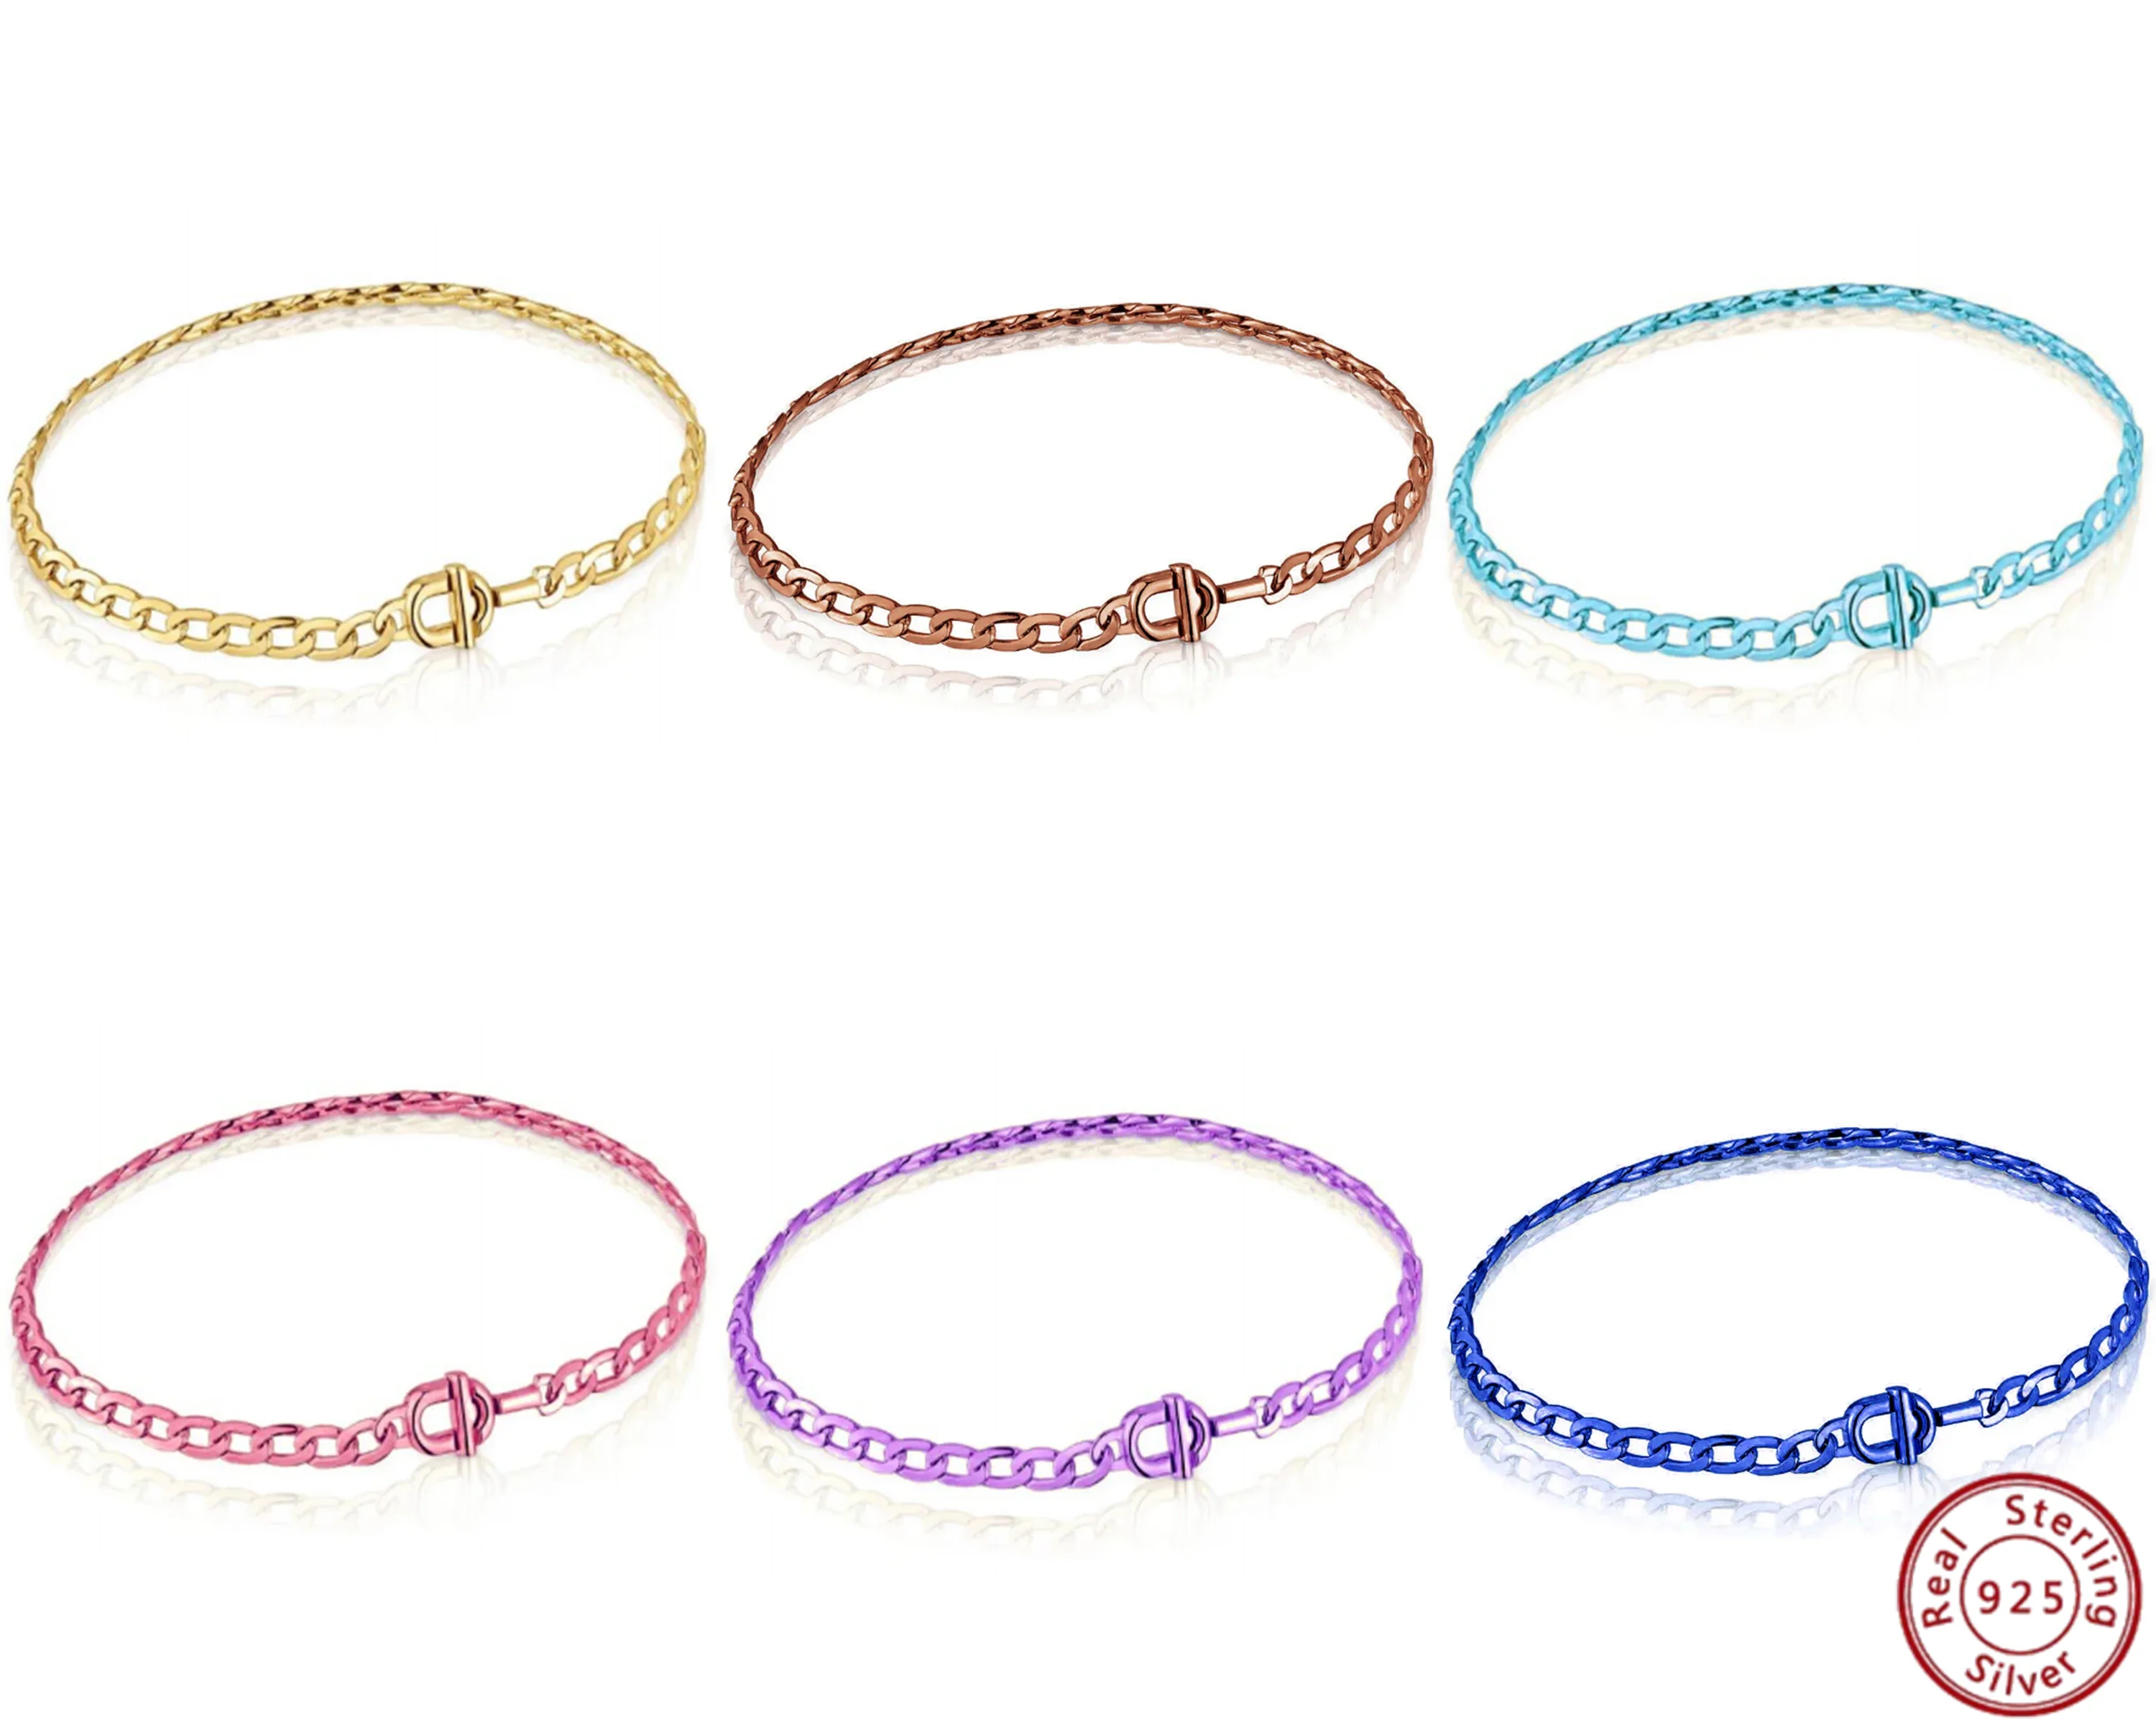 

2023 Spanish Bear S925 Sterling Silver Bracelets – Radiant and refined, adding a touch of glamour to any outfit